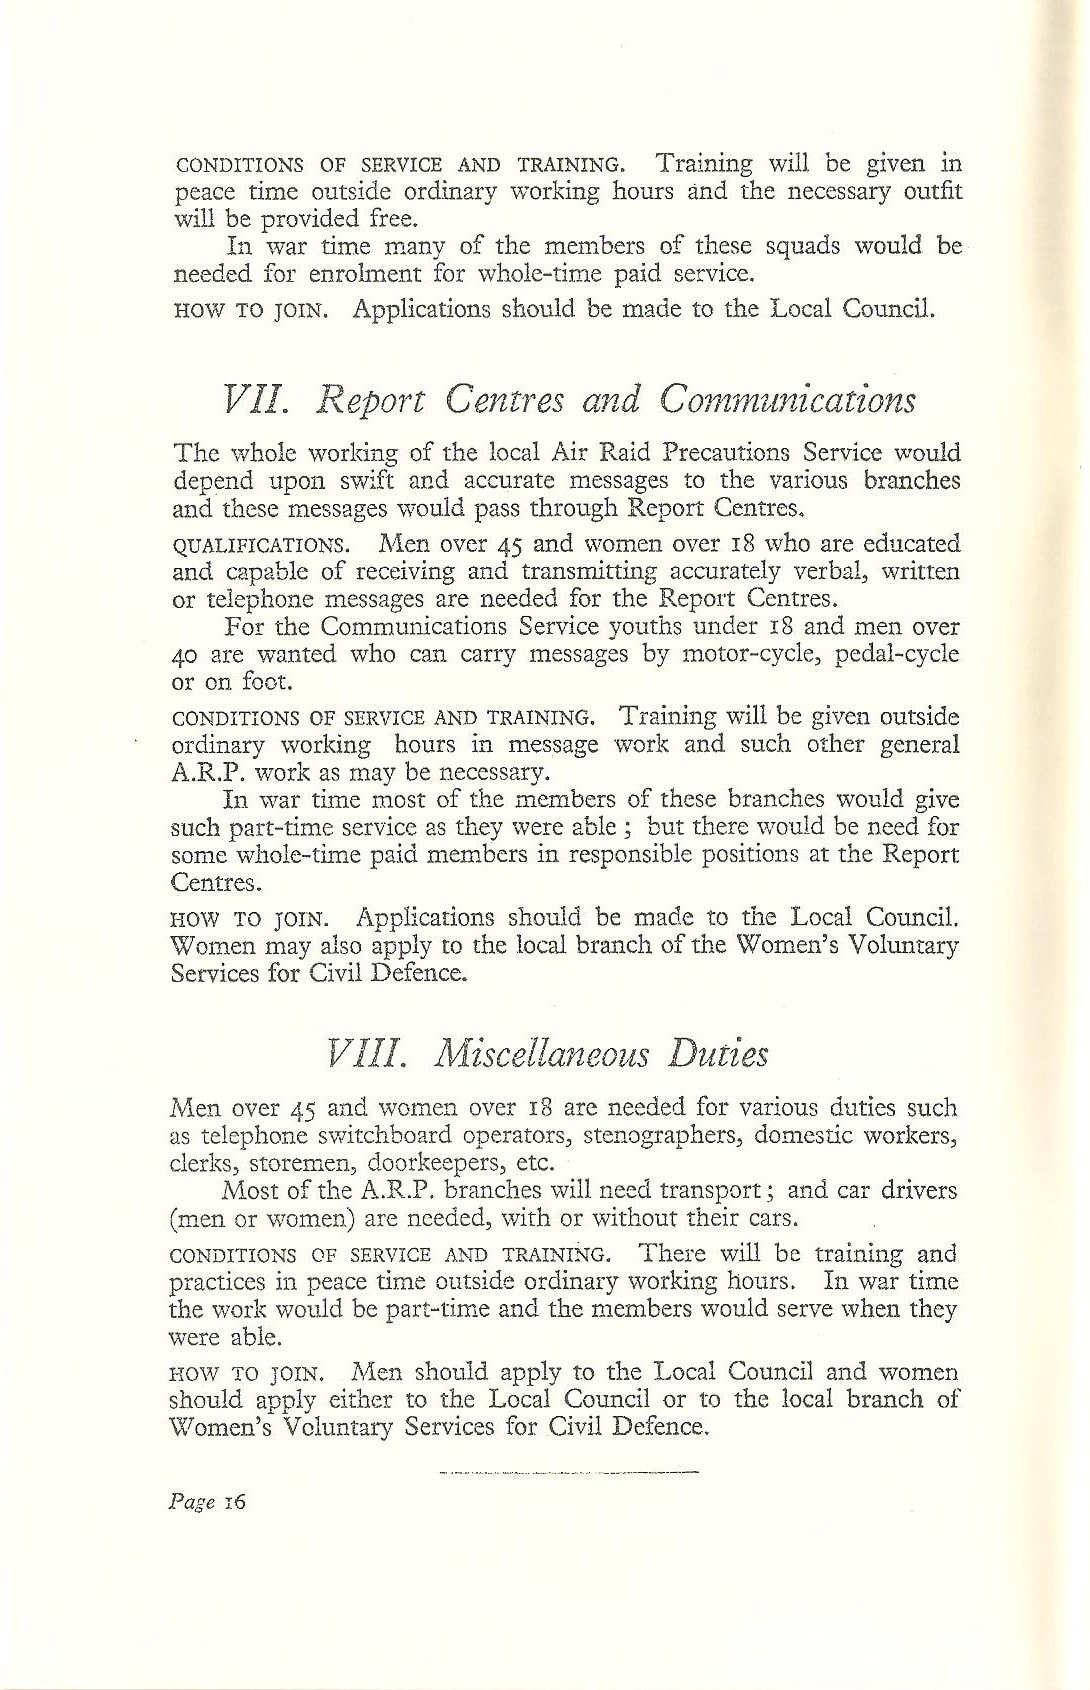 National Service Guide 1939 Air Raid Precautions - Report Centres & Communications and Miscellaneous Duties